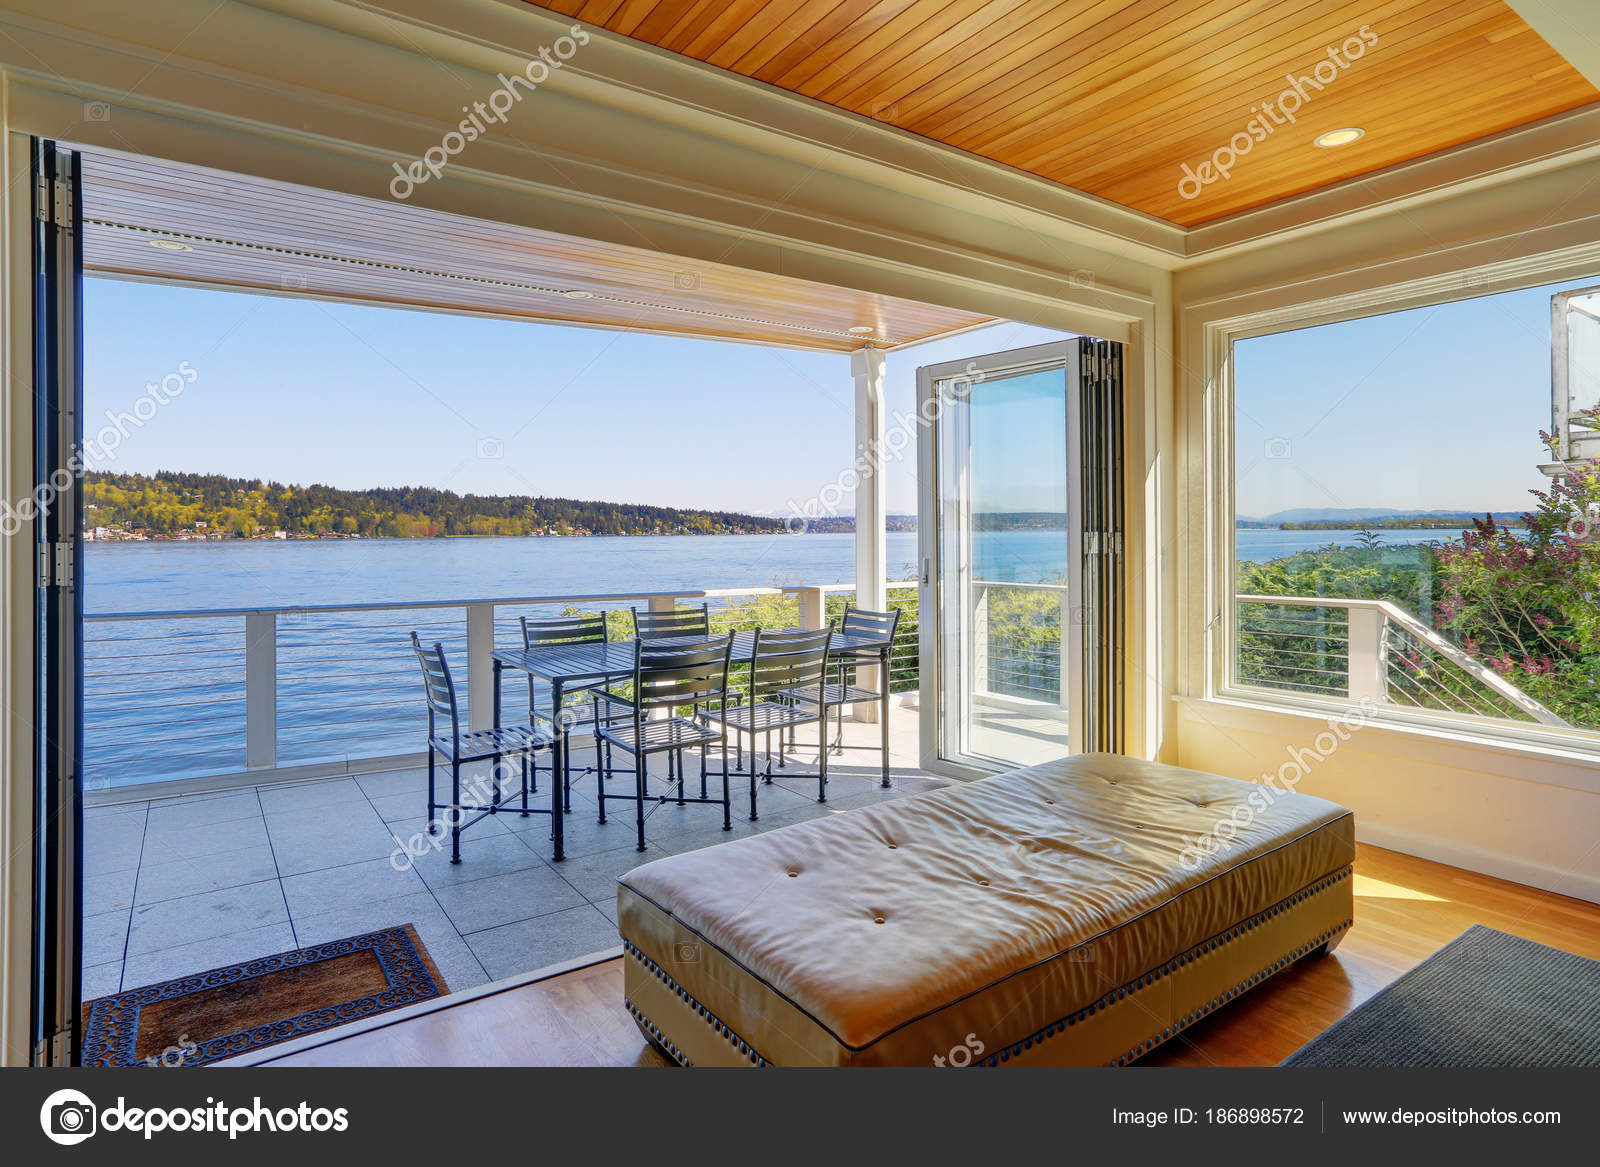 Lakefront Home Interior Shows The Covered Deck Stock Photo